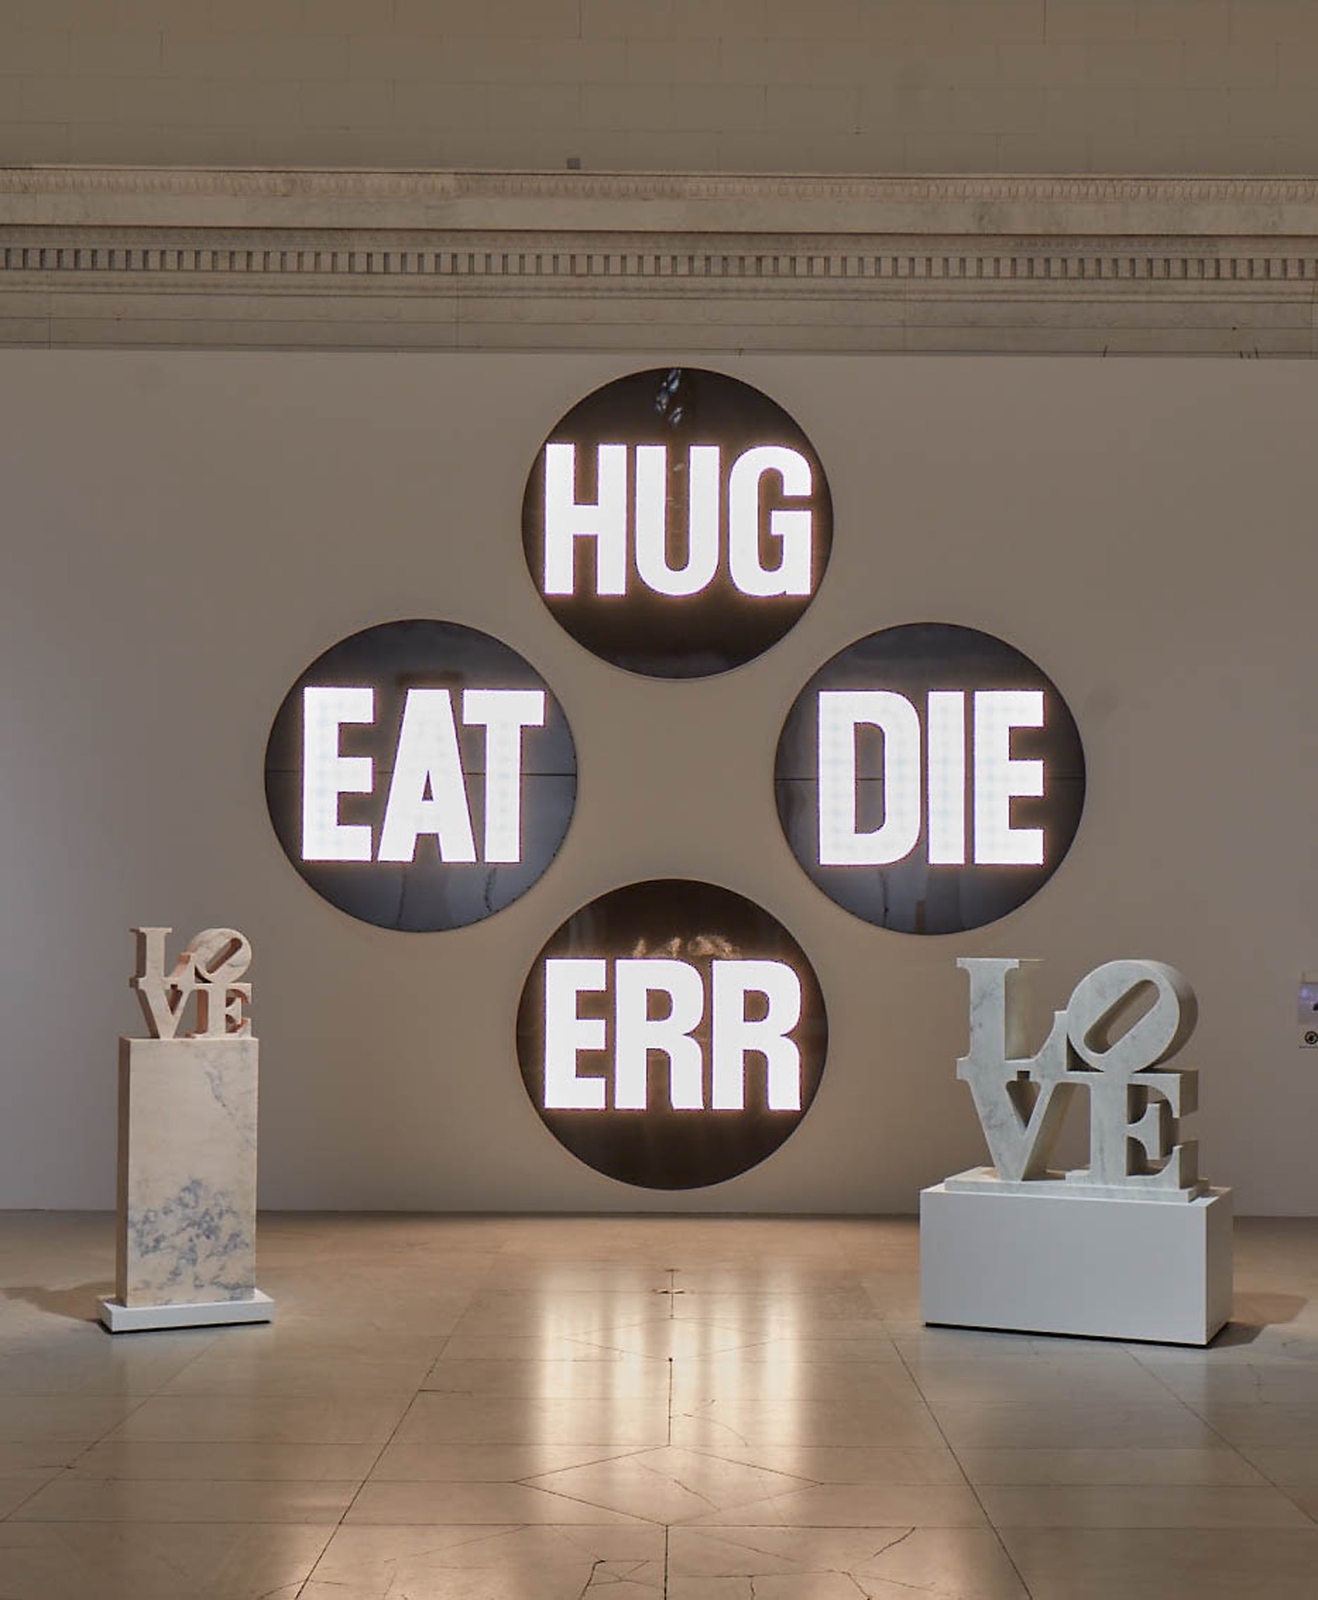 Installation view of&amp;nbsp;Robert Indiana: A Sculpture Retrospective&amp;nbsp;in the Albright-Knox Art Gallery, Buffalo, June 16&amp;ndash;September 23, 2018; left to right,&amp;nbsp;LOVE&amp;nbsp;(2005),&amp;nbsp;The Electric American Dream (EAT/DIE/HUG/ERR)&amp;nbsp;(2007), and&amp;nbsp;LOVE&amp;nbsp;(2006)&amp;nbsp;